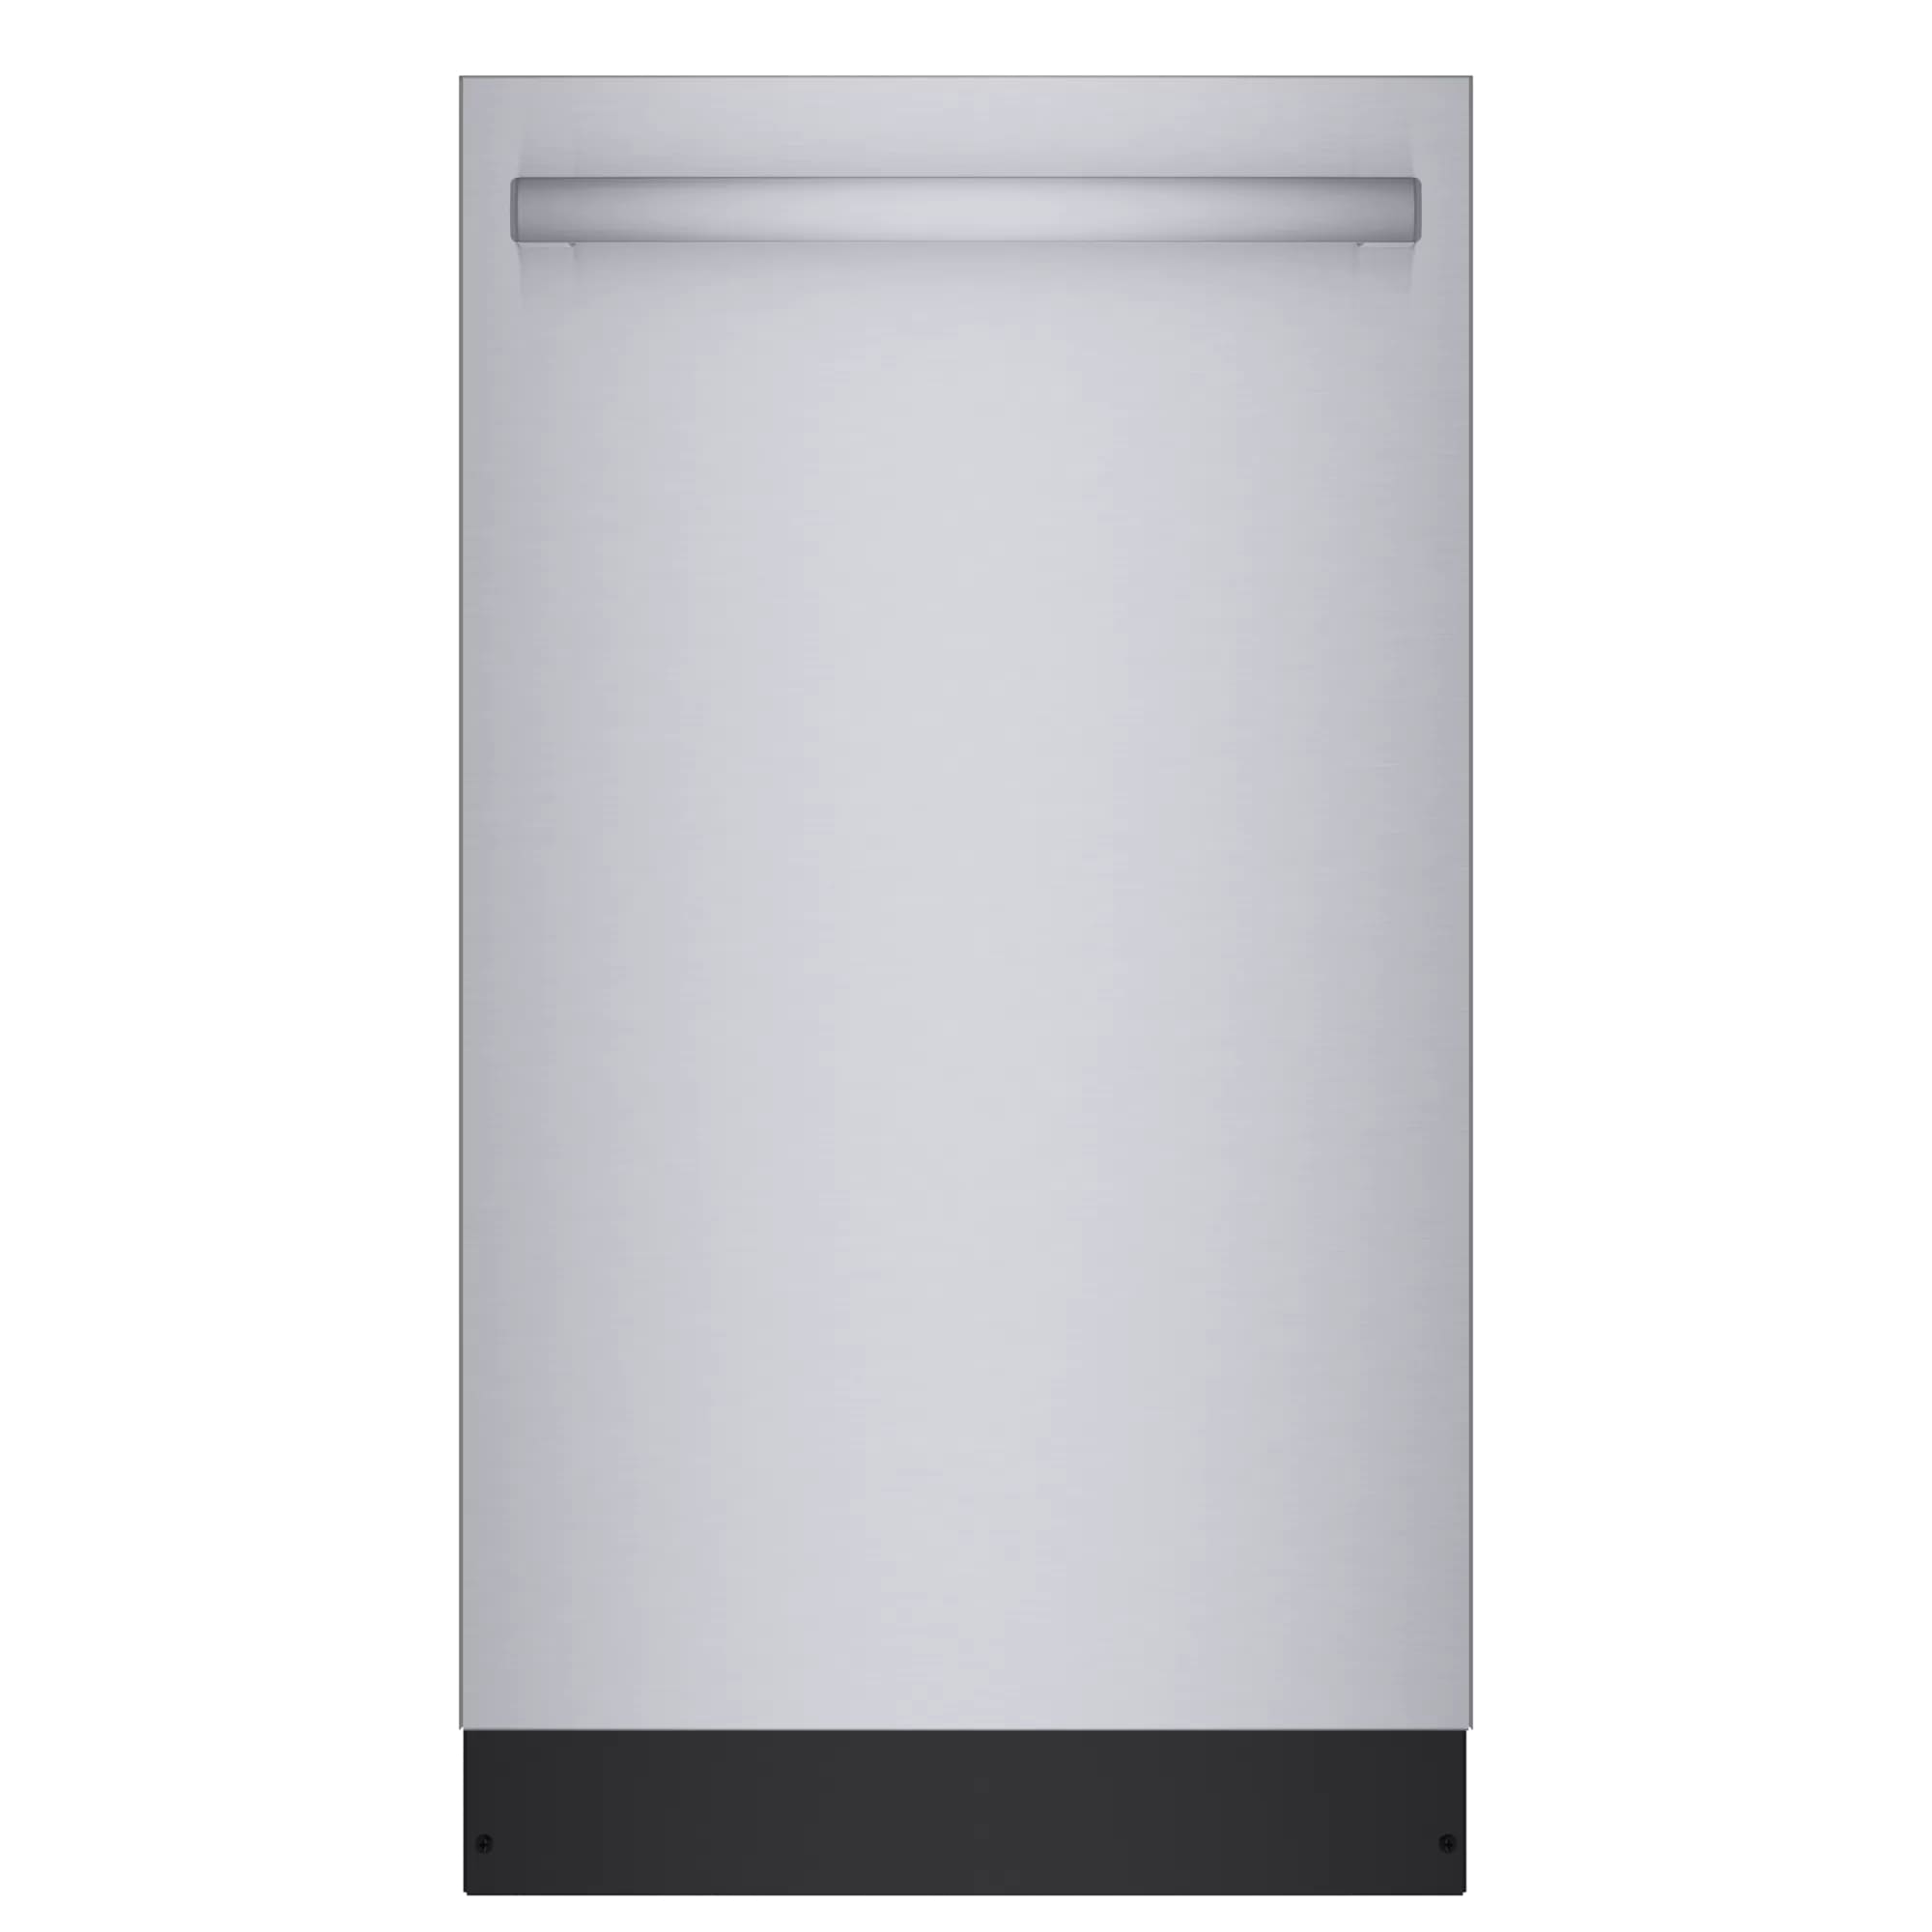 Bosch - 44 dBA Compact Dishwasher in Stainless - SPX68B55UC